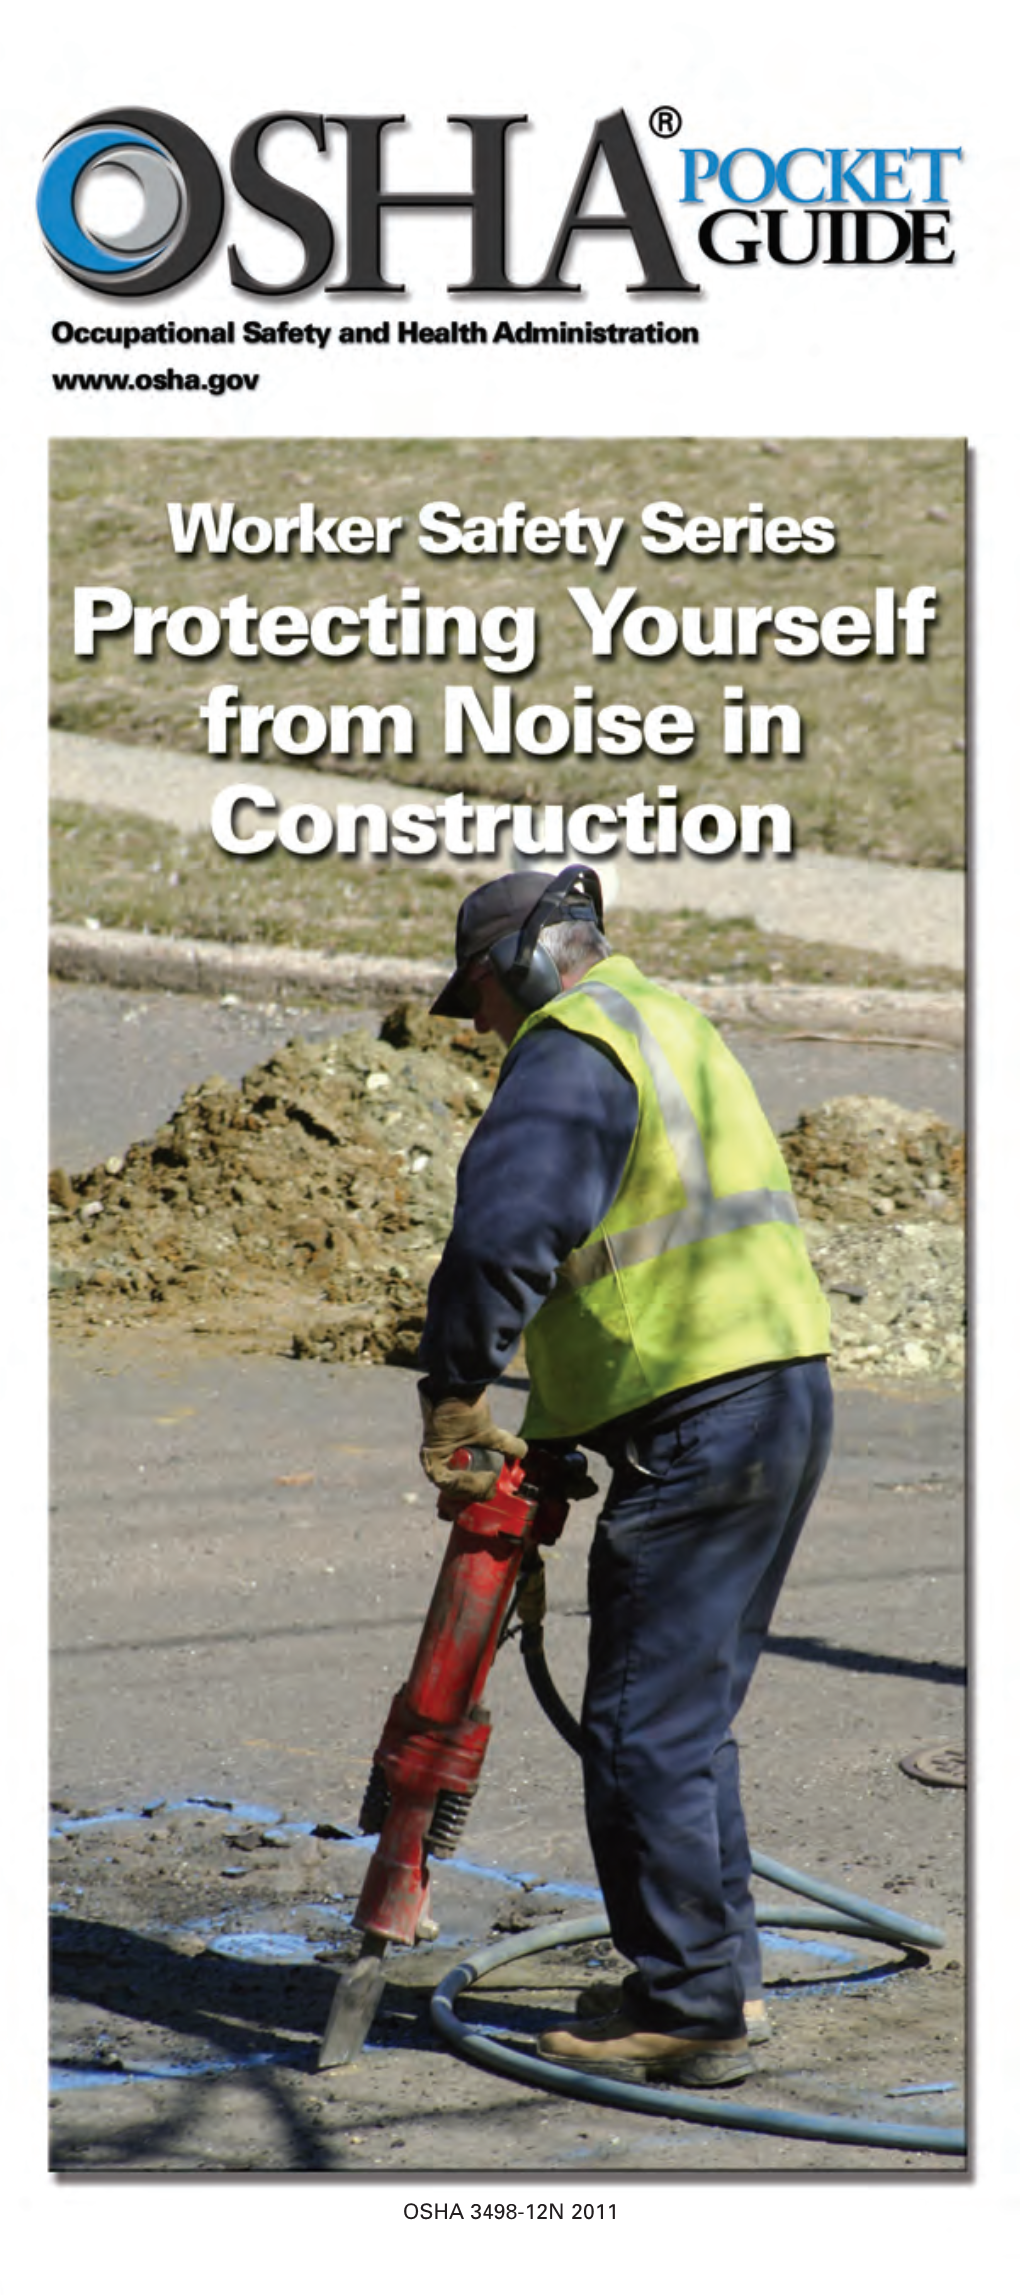 Protecting Yourself from Noise in Construction OSHA Pocket Guide